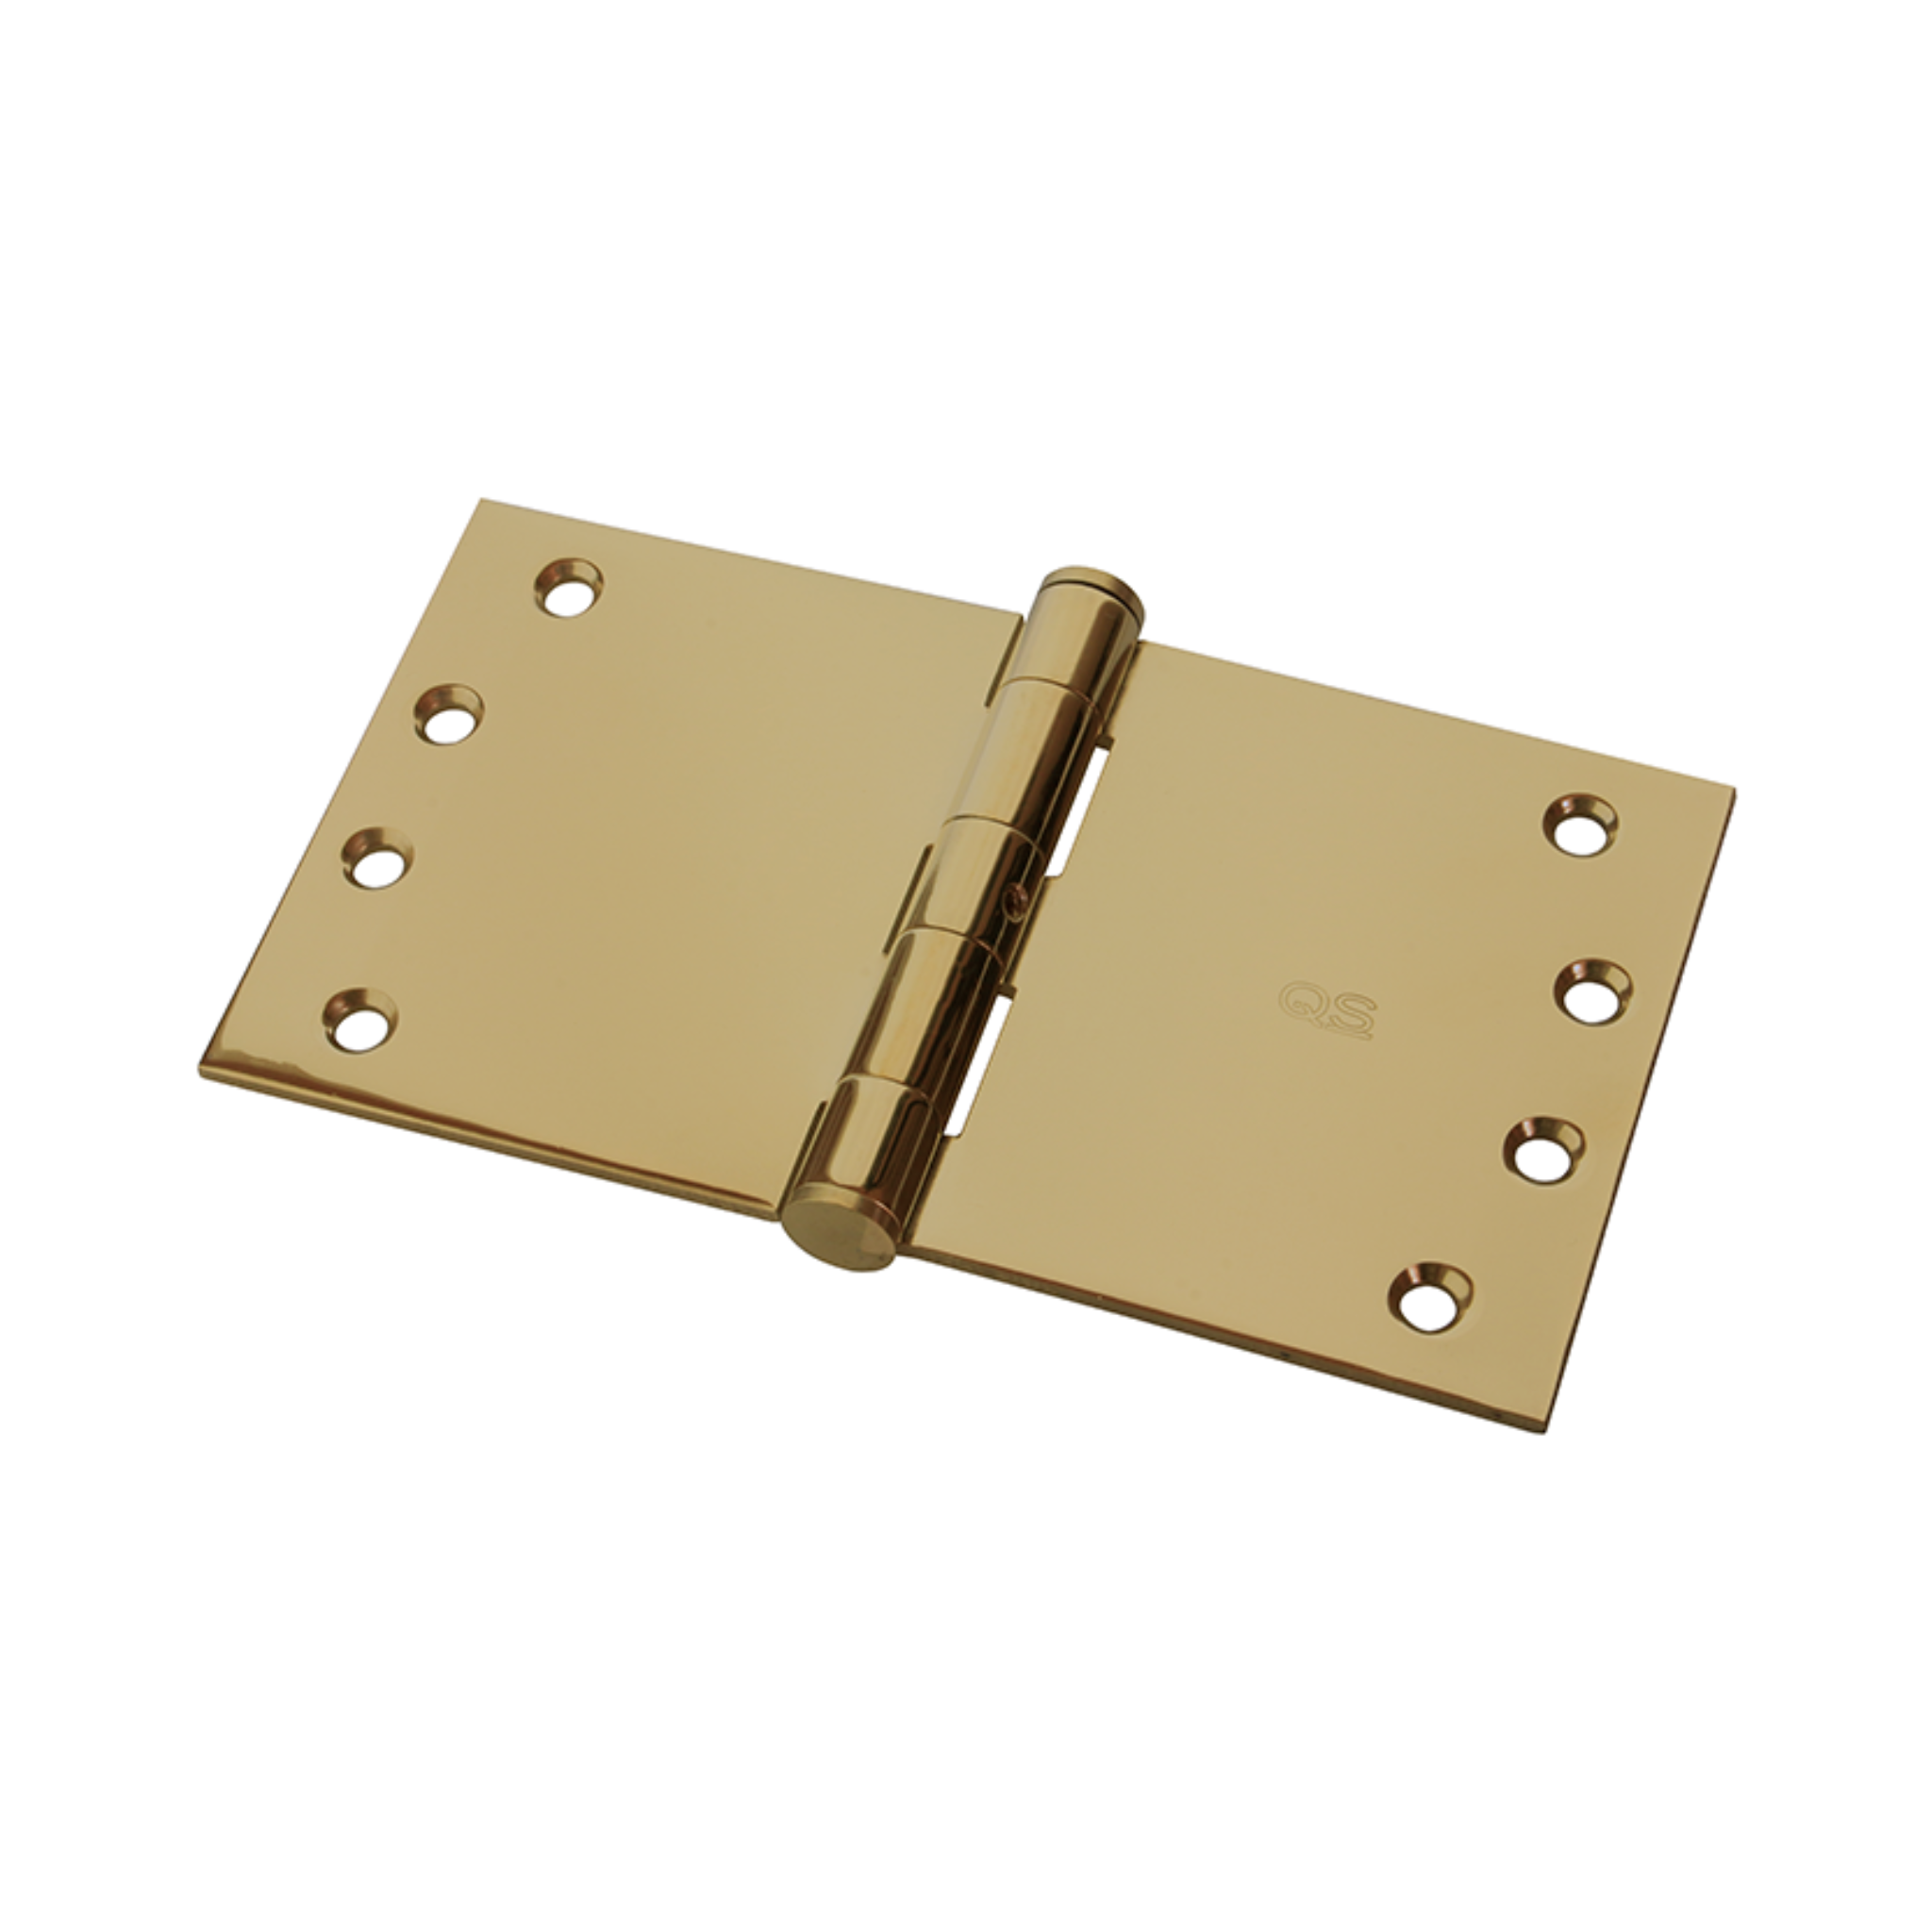 QS4412/1PVD, Projection Hinge, 2 x Hinges (1 Pair), 100mm (h) x 150mm (w) x 3mm (t), PVD Brass, QS